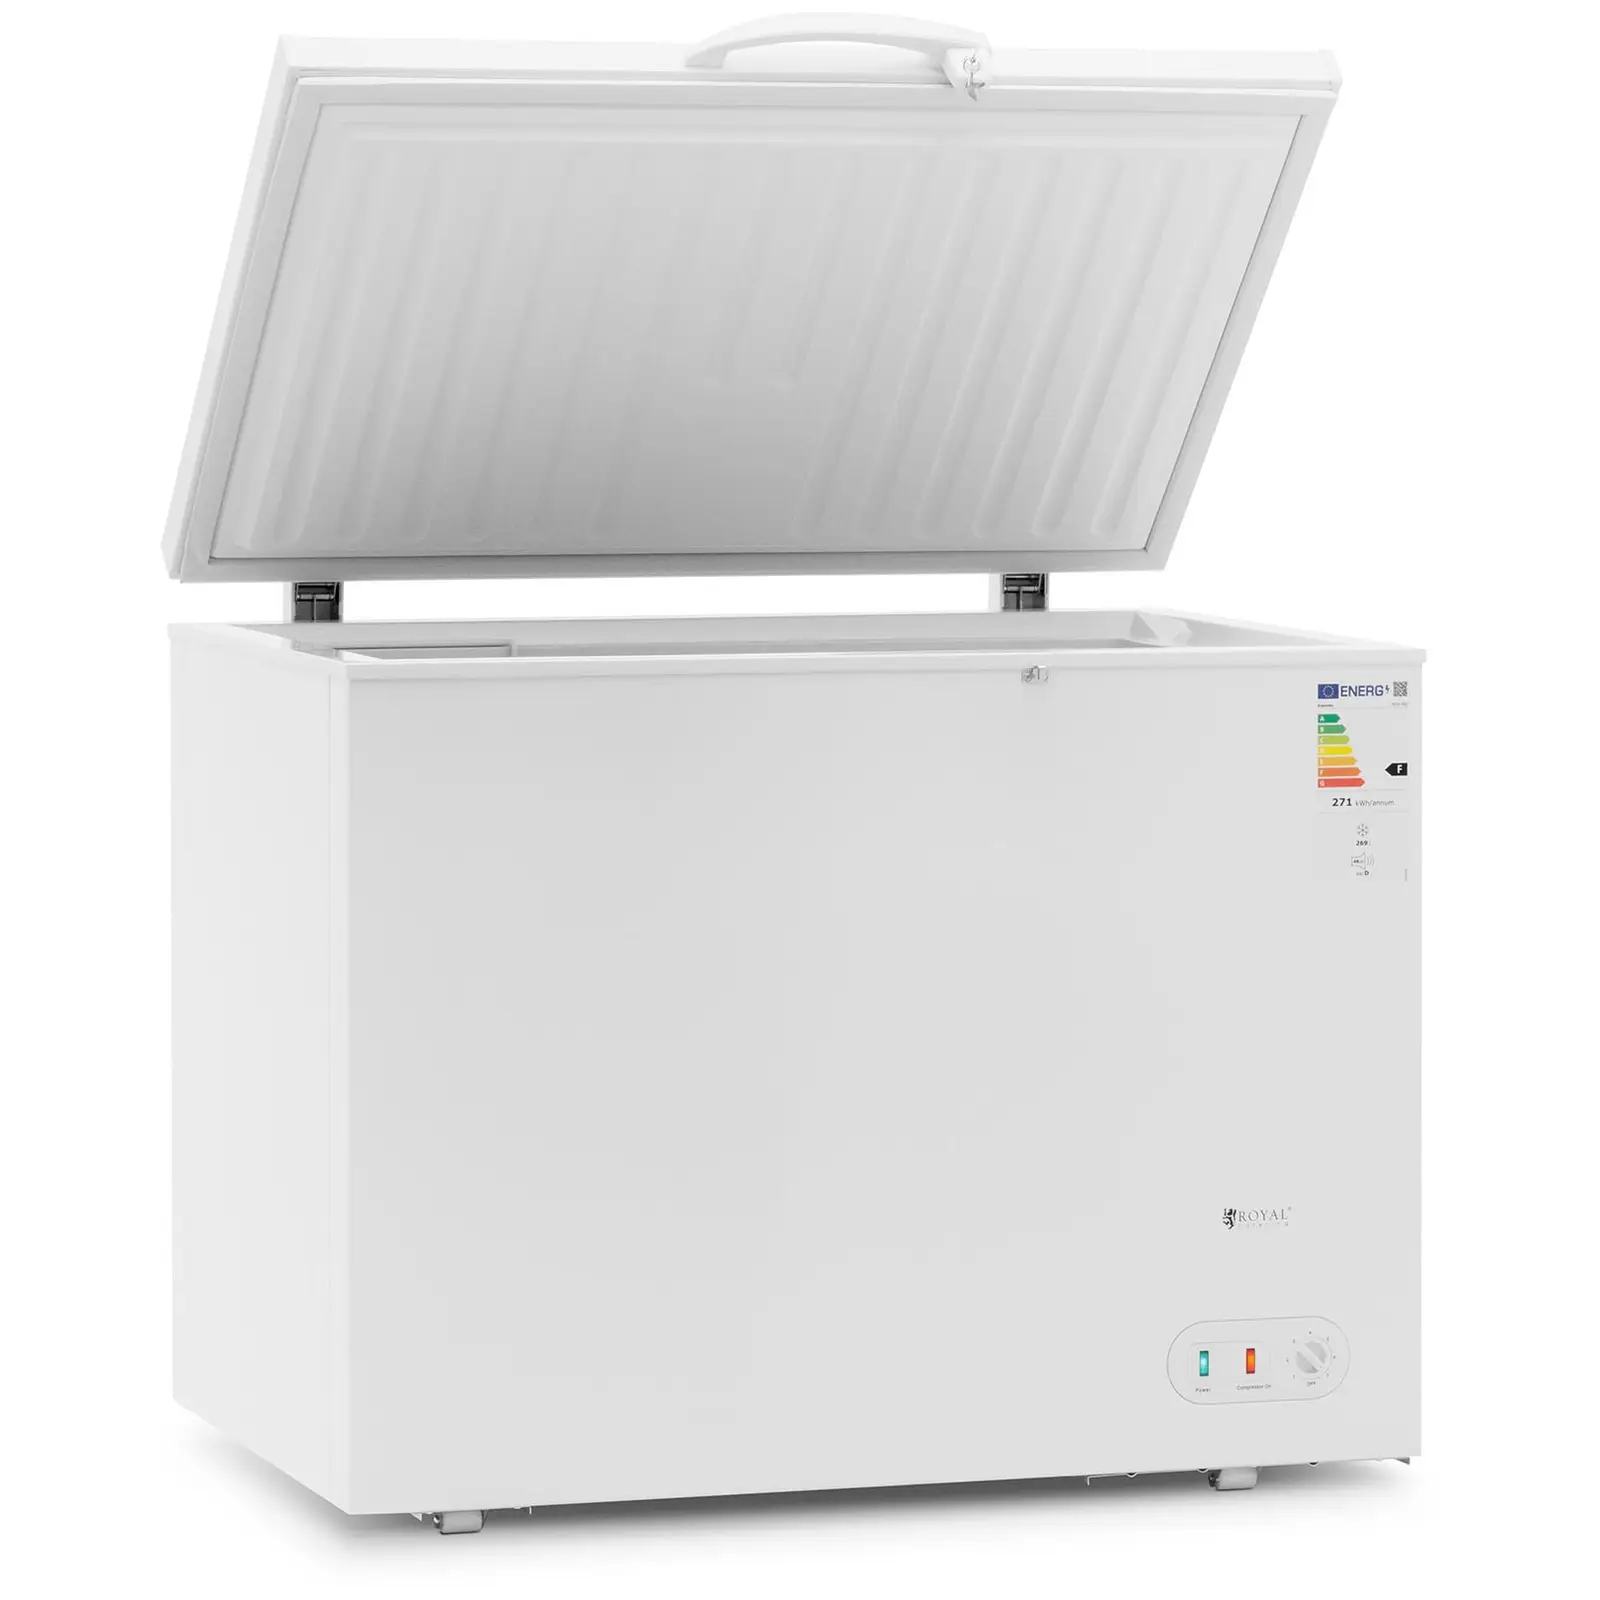 Chest Freezer - 269 L - Royal Catering - 63 W